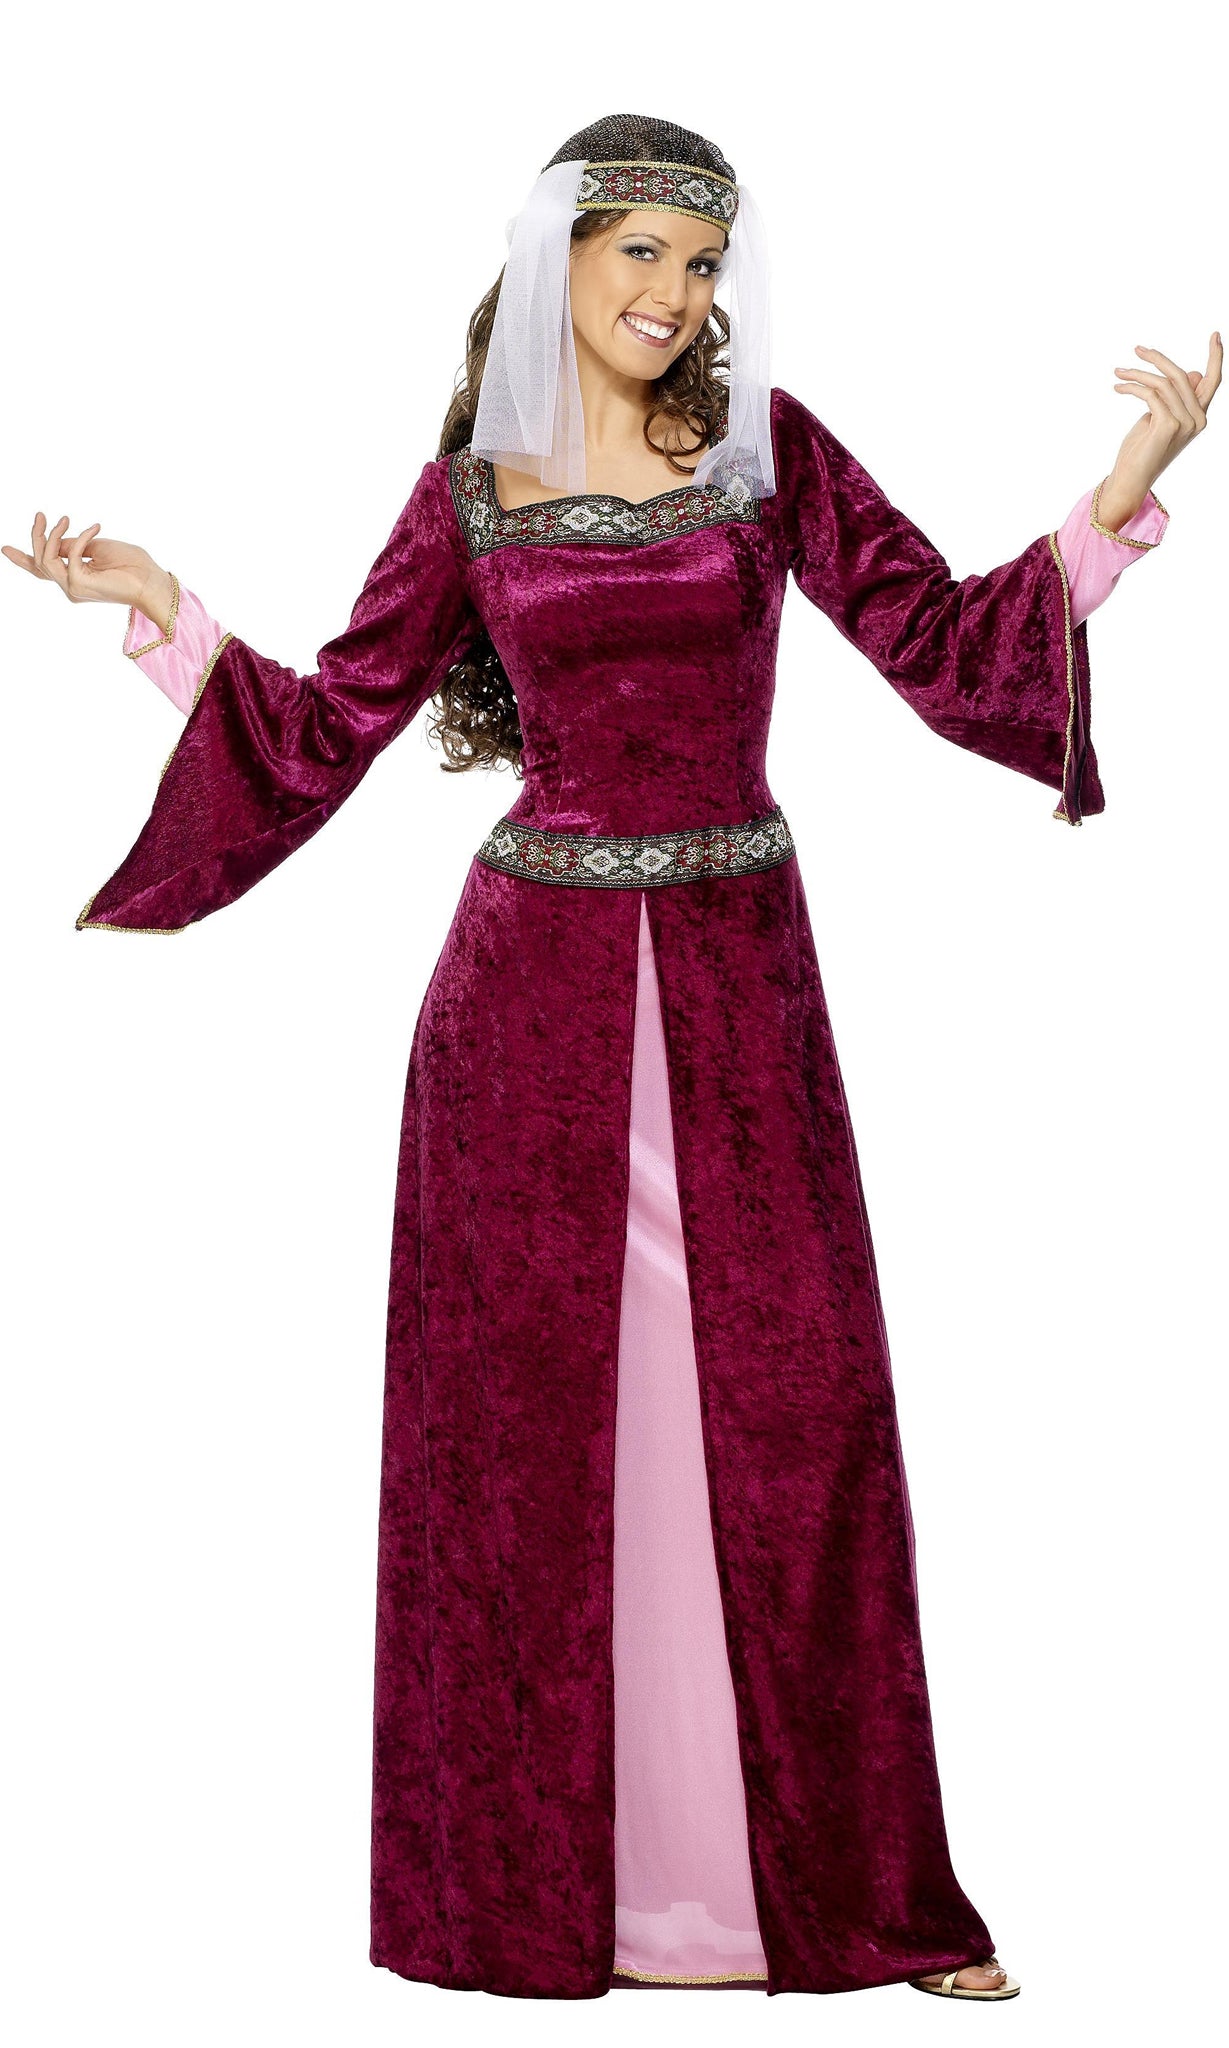 Pink and purple long Maid Marian style dress with headpiece